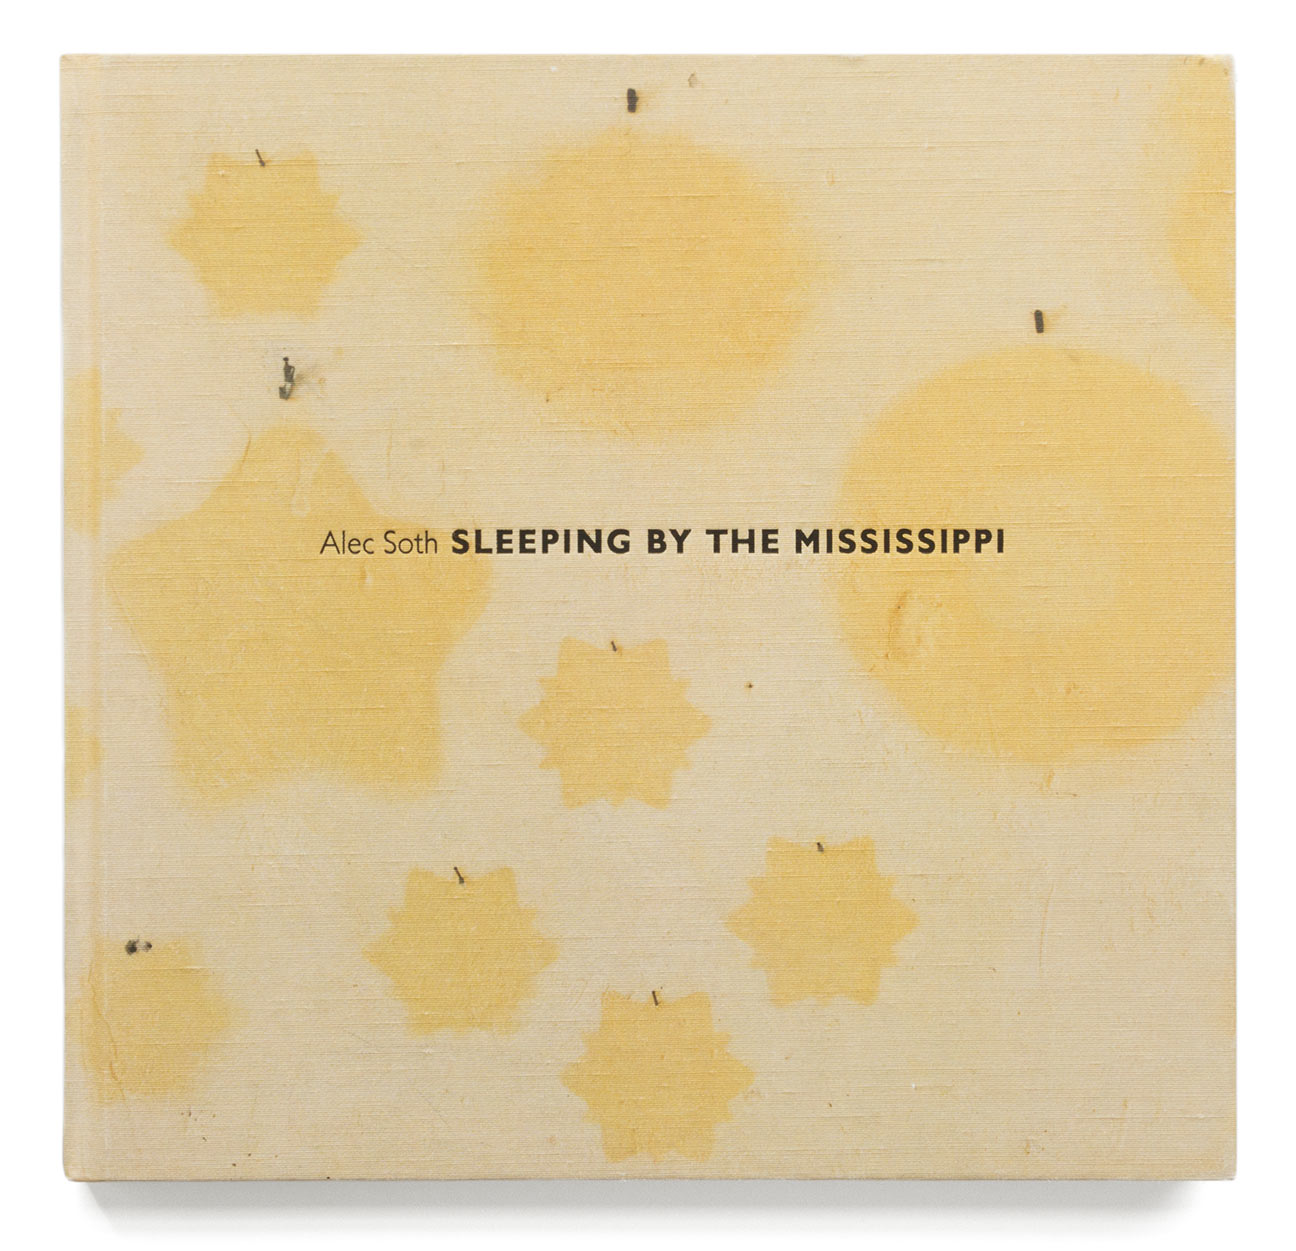 Sleeping by the Mississippi. Steidl, 2004.